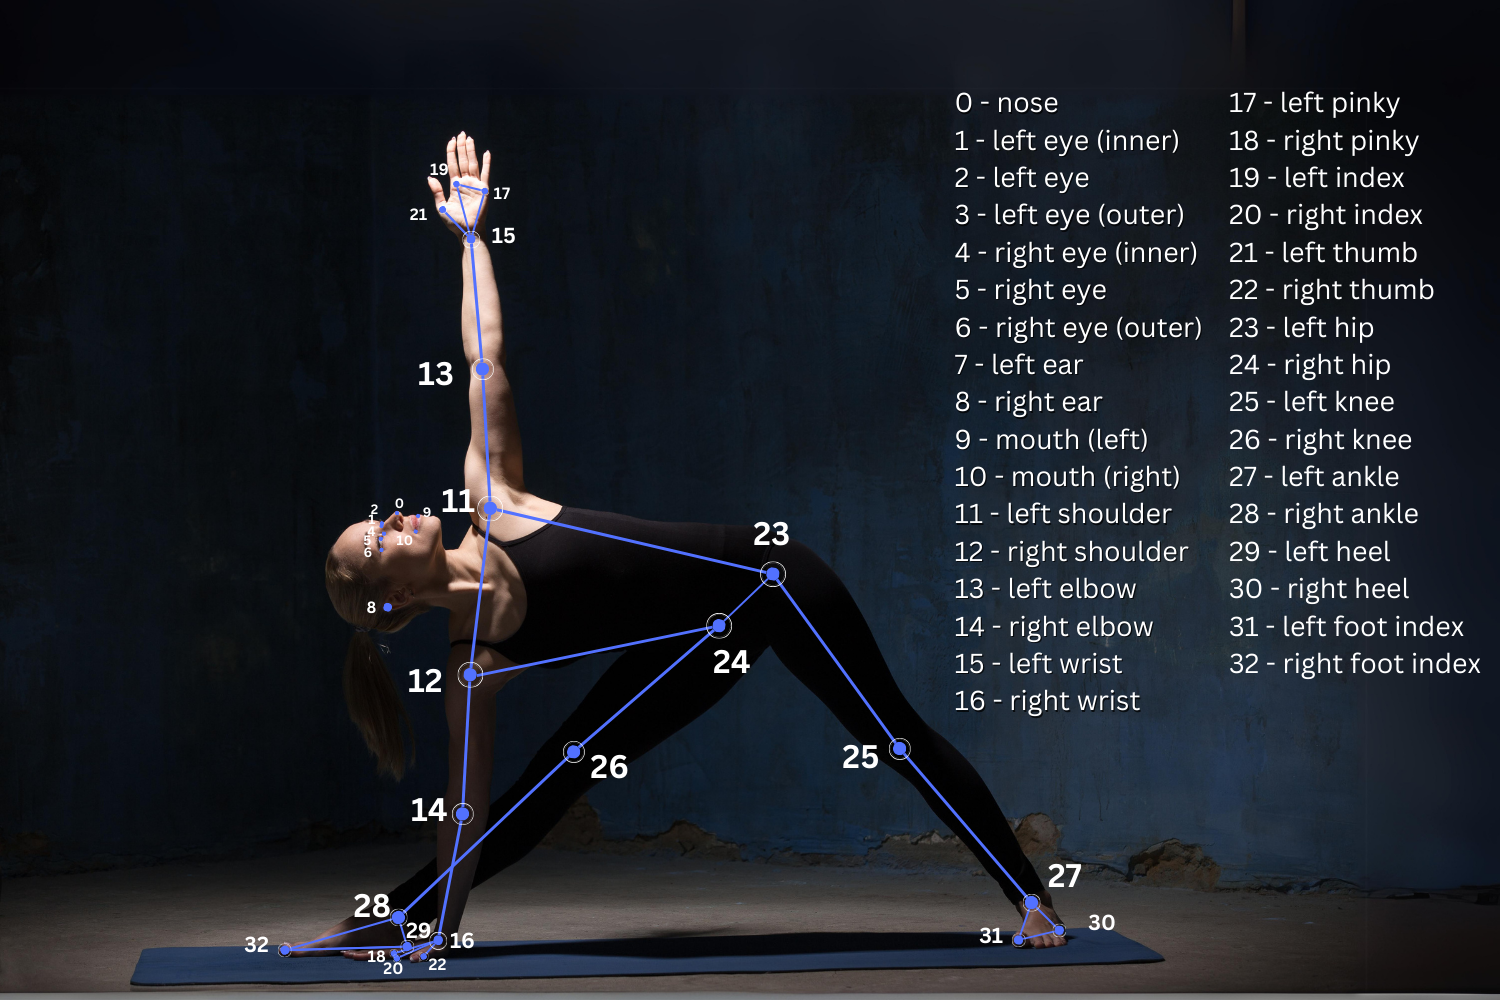 Yoga triangle pose, image shows a yogi doing a yoga pose with Artificial intelligence pose estimation overlay on mediapipe landmarks. The Landmarks are labelled for MediaPipe for Yoga